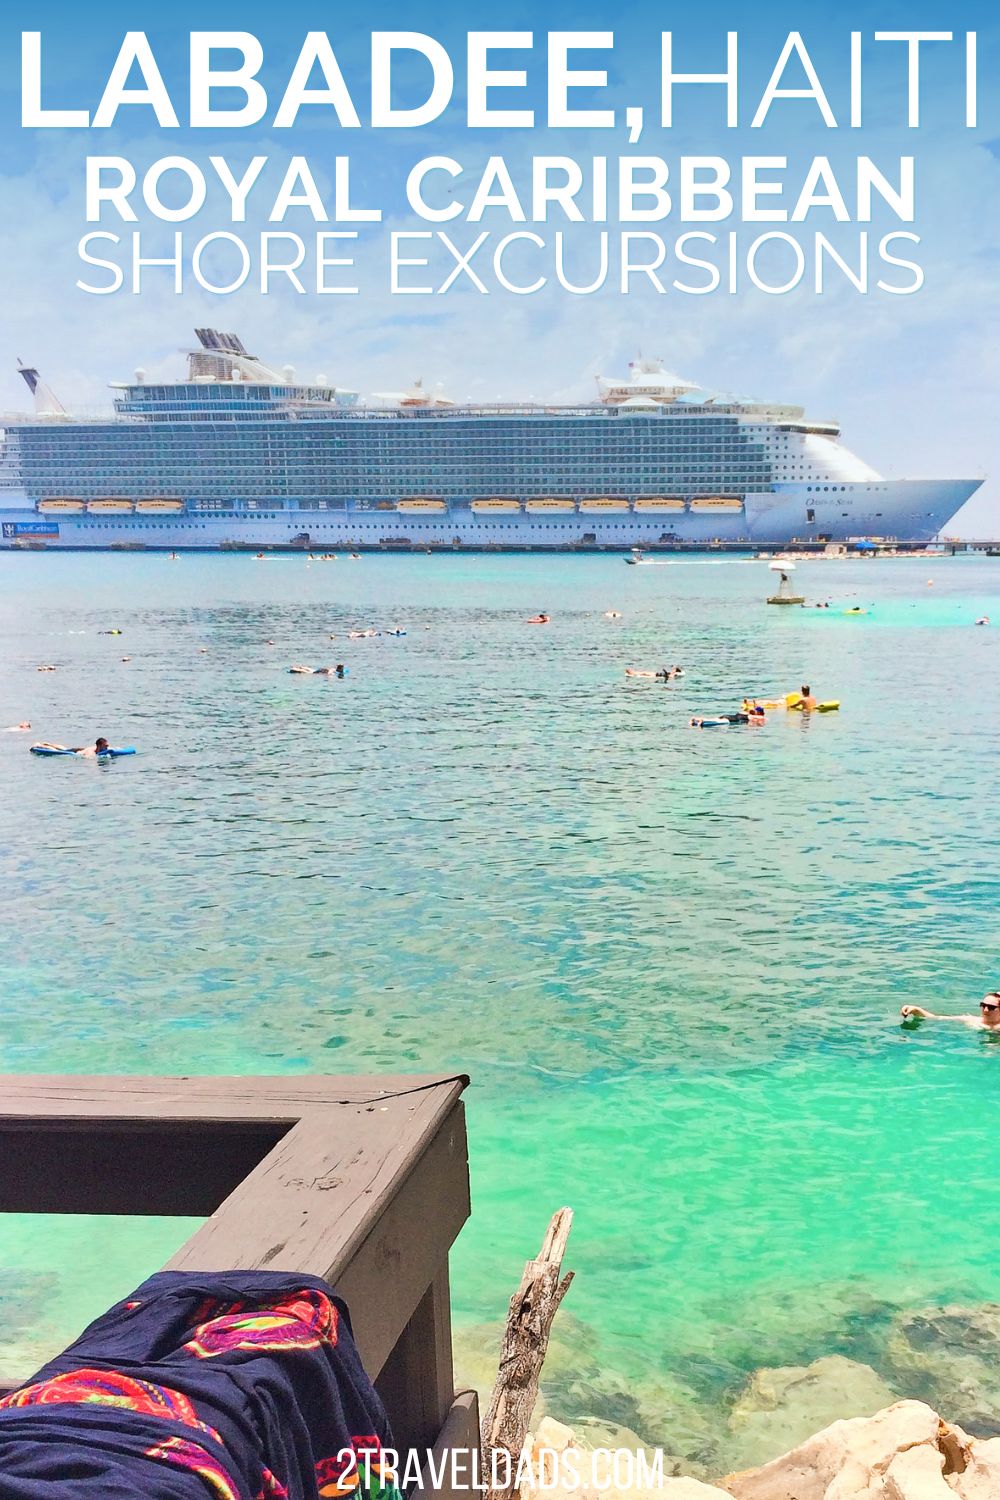 Visiting Labadee, Haiti is a common itinerary day for sailing with Royal Caribbean. Review of the shore excursions and picks for how to spend your day on land in Labadee.